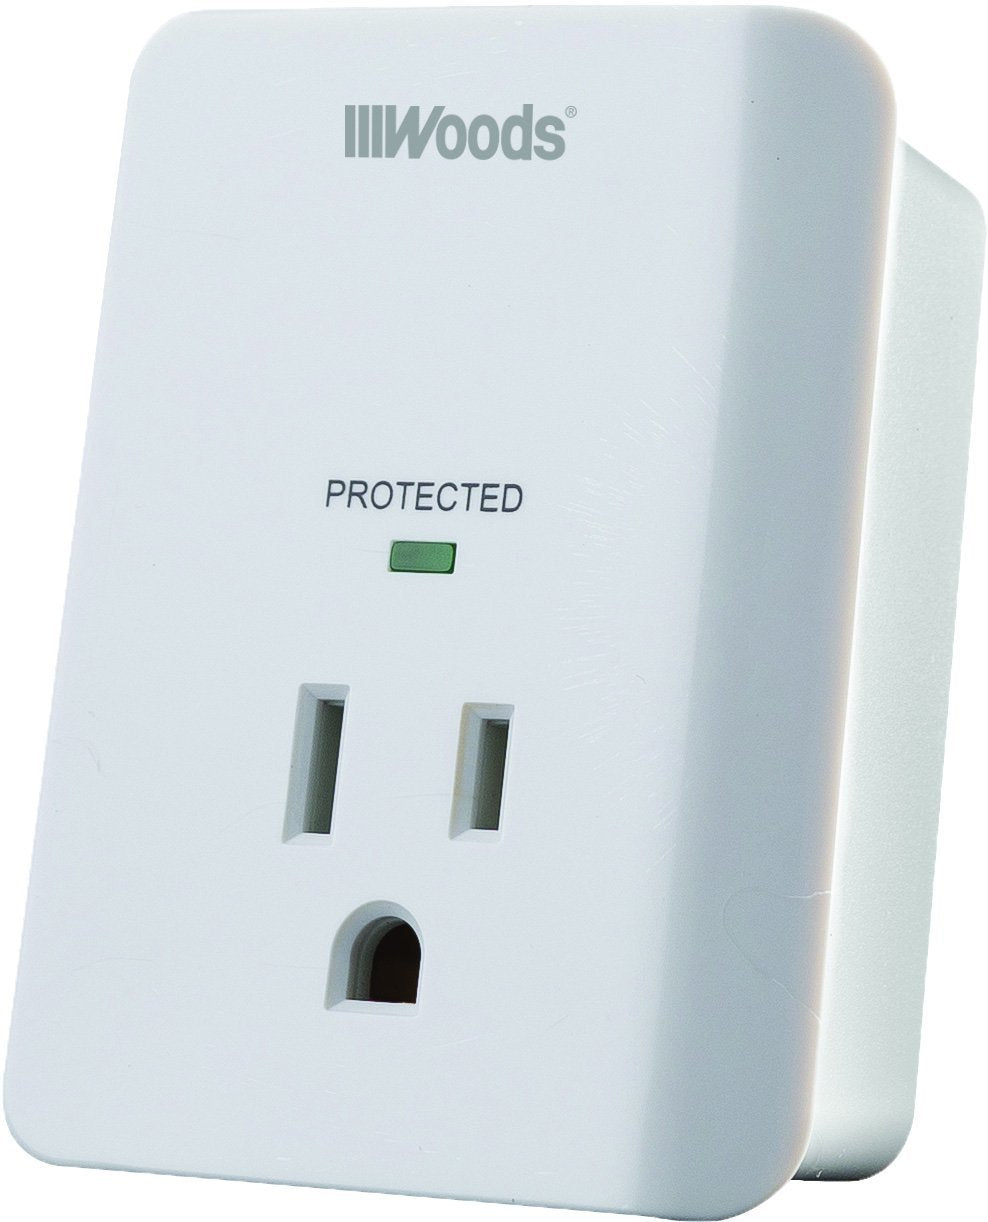 Woods 41008 1-Outlet Power Surge Protector with LED Indicator & Alarm, White